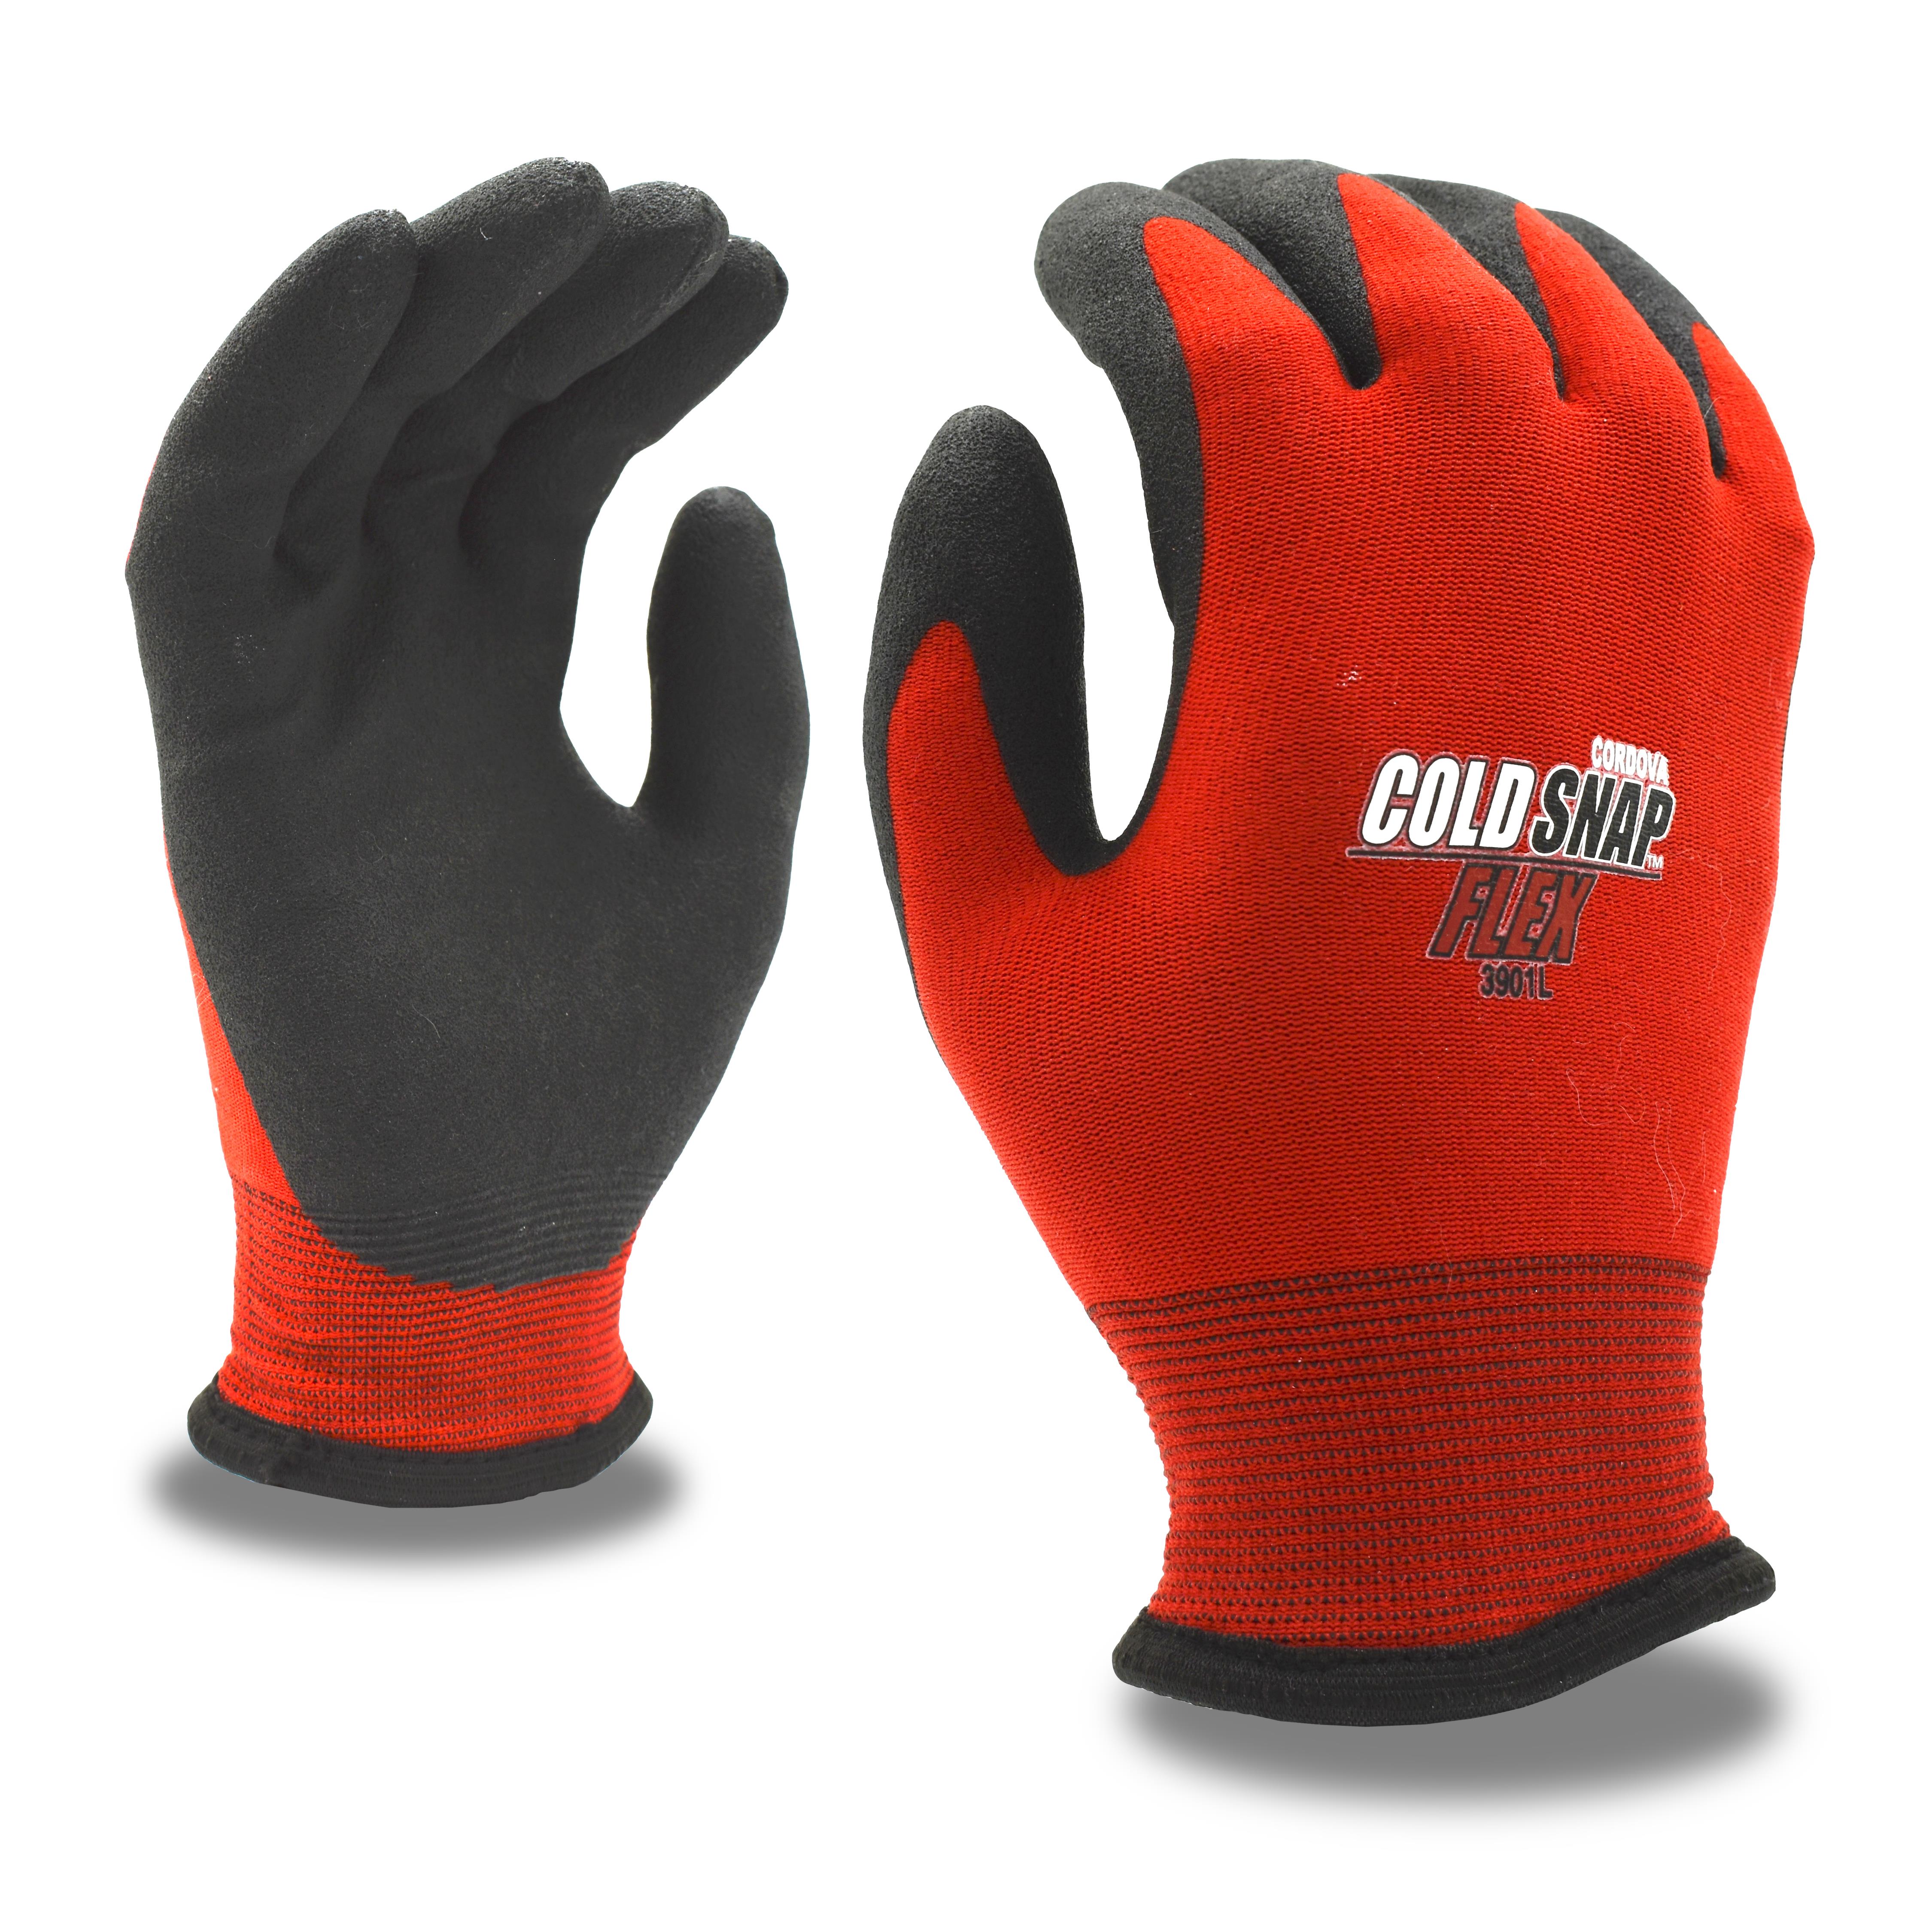 COLD SNAP FLEX FOAM PVC PALM COATED - Insulated Gloves